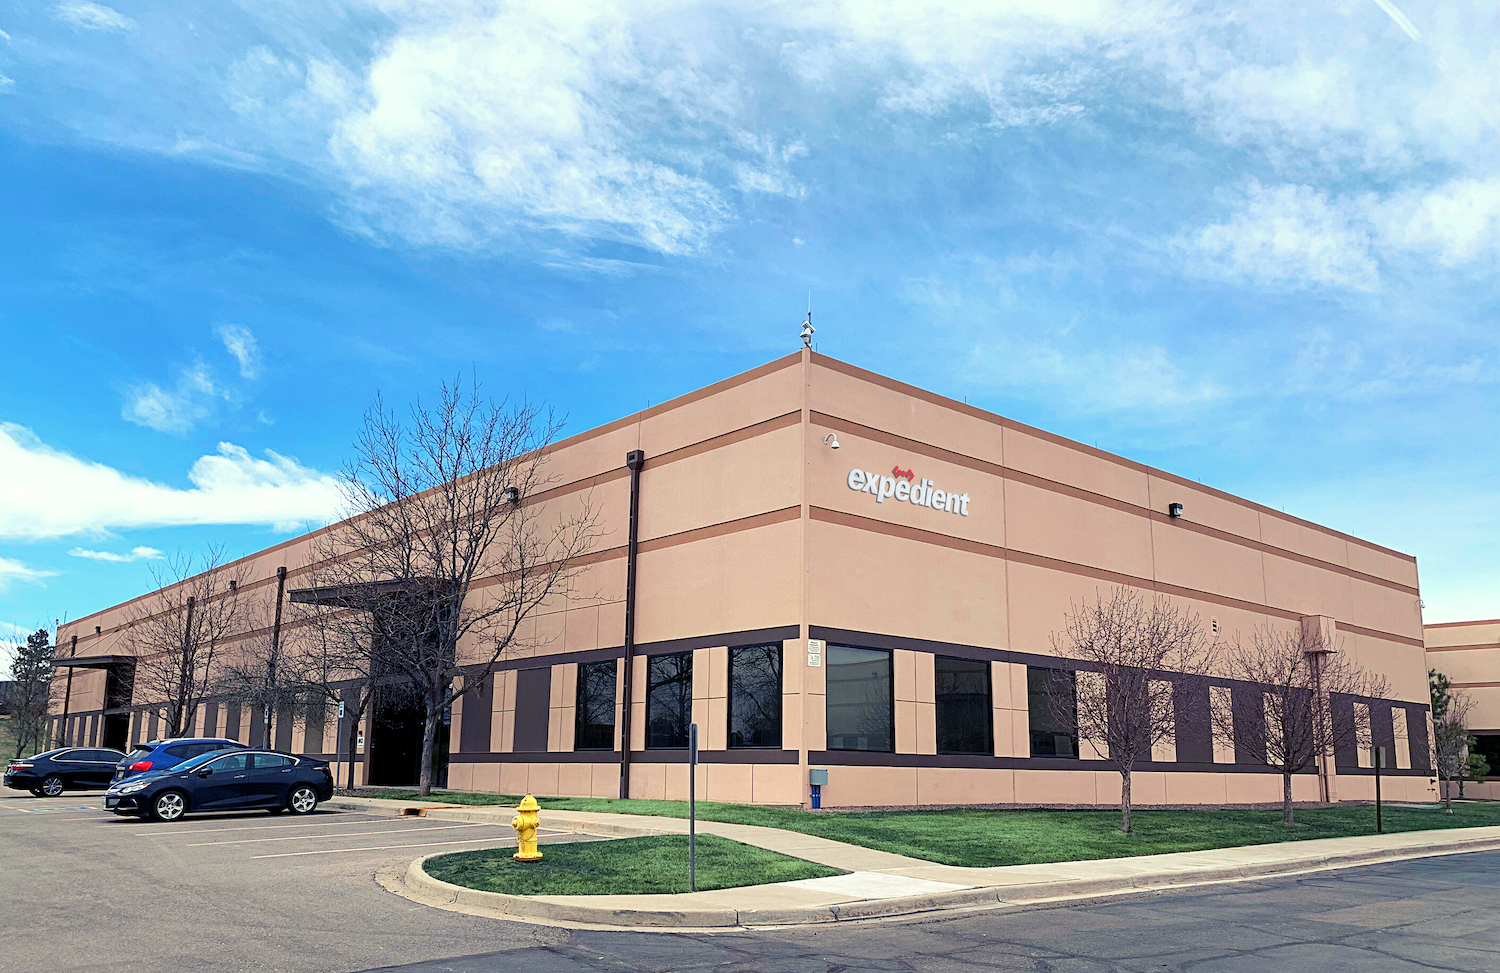 Expedient is opening a data center in Denver